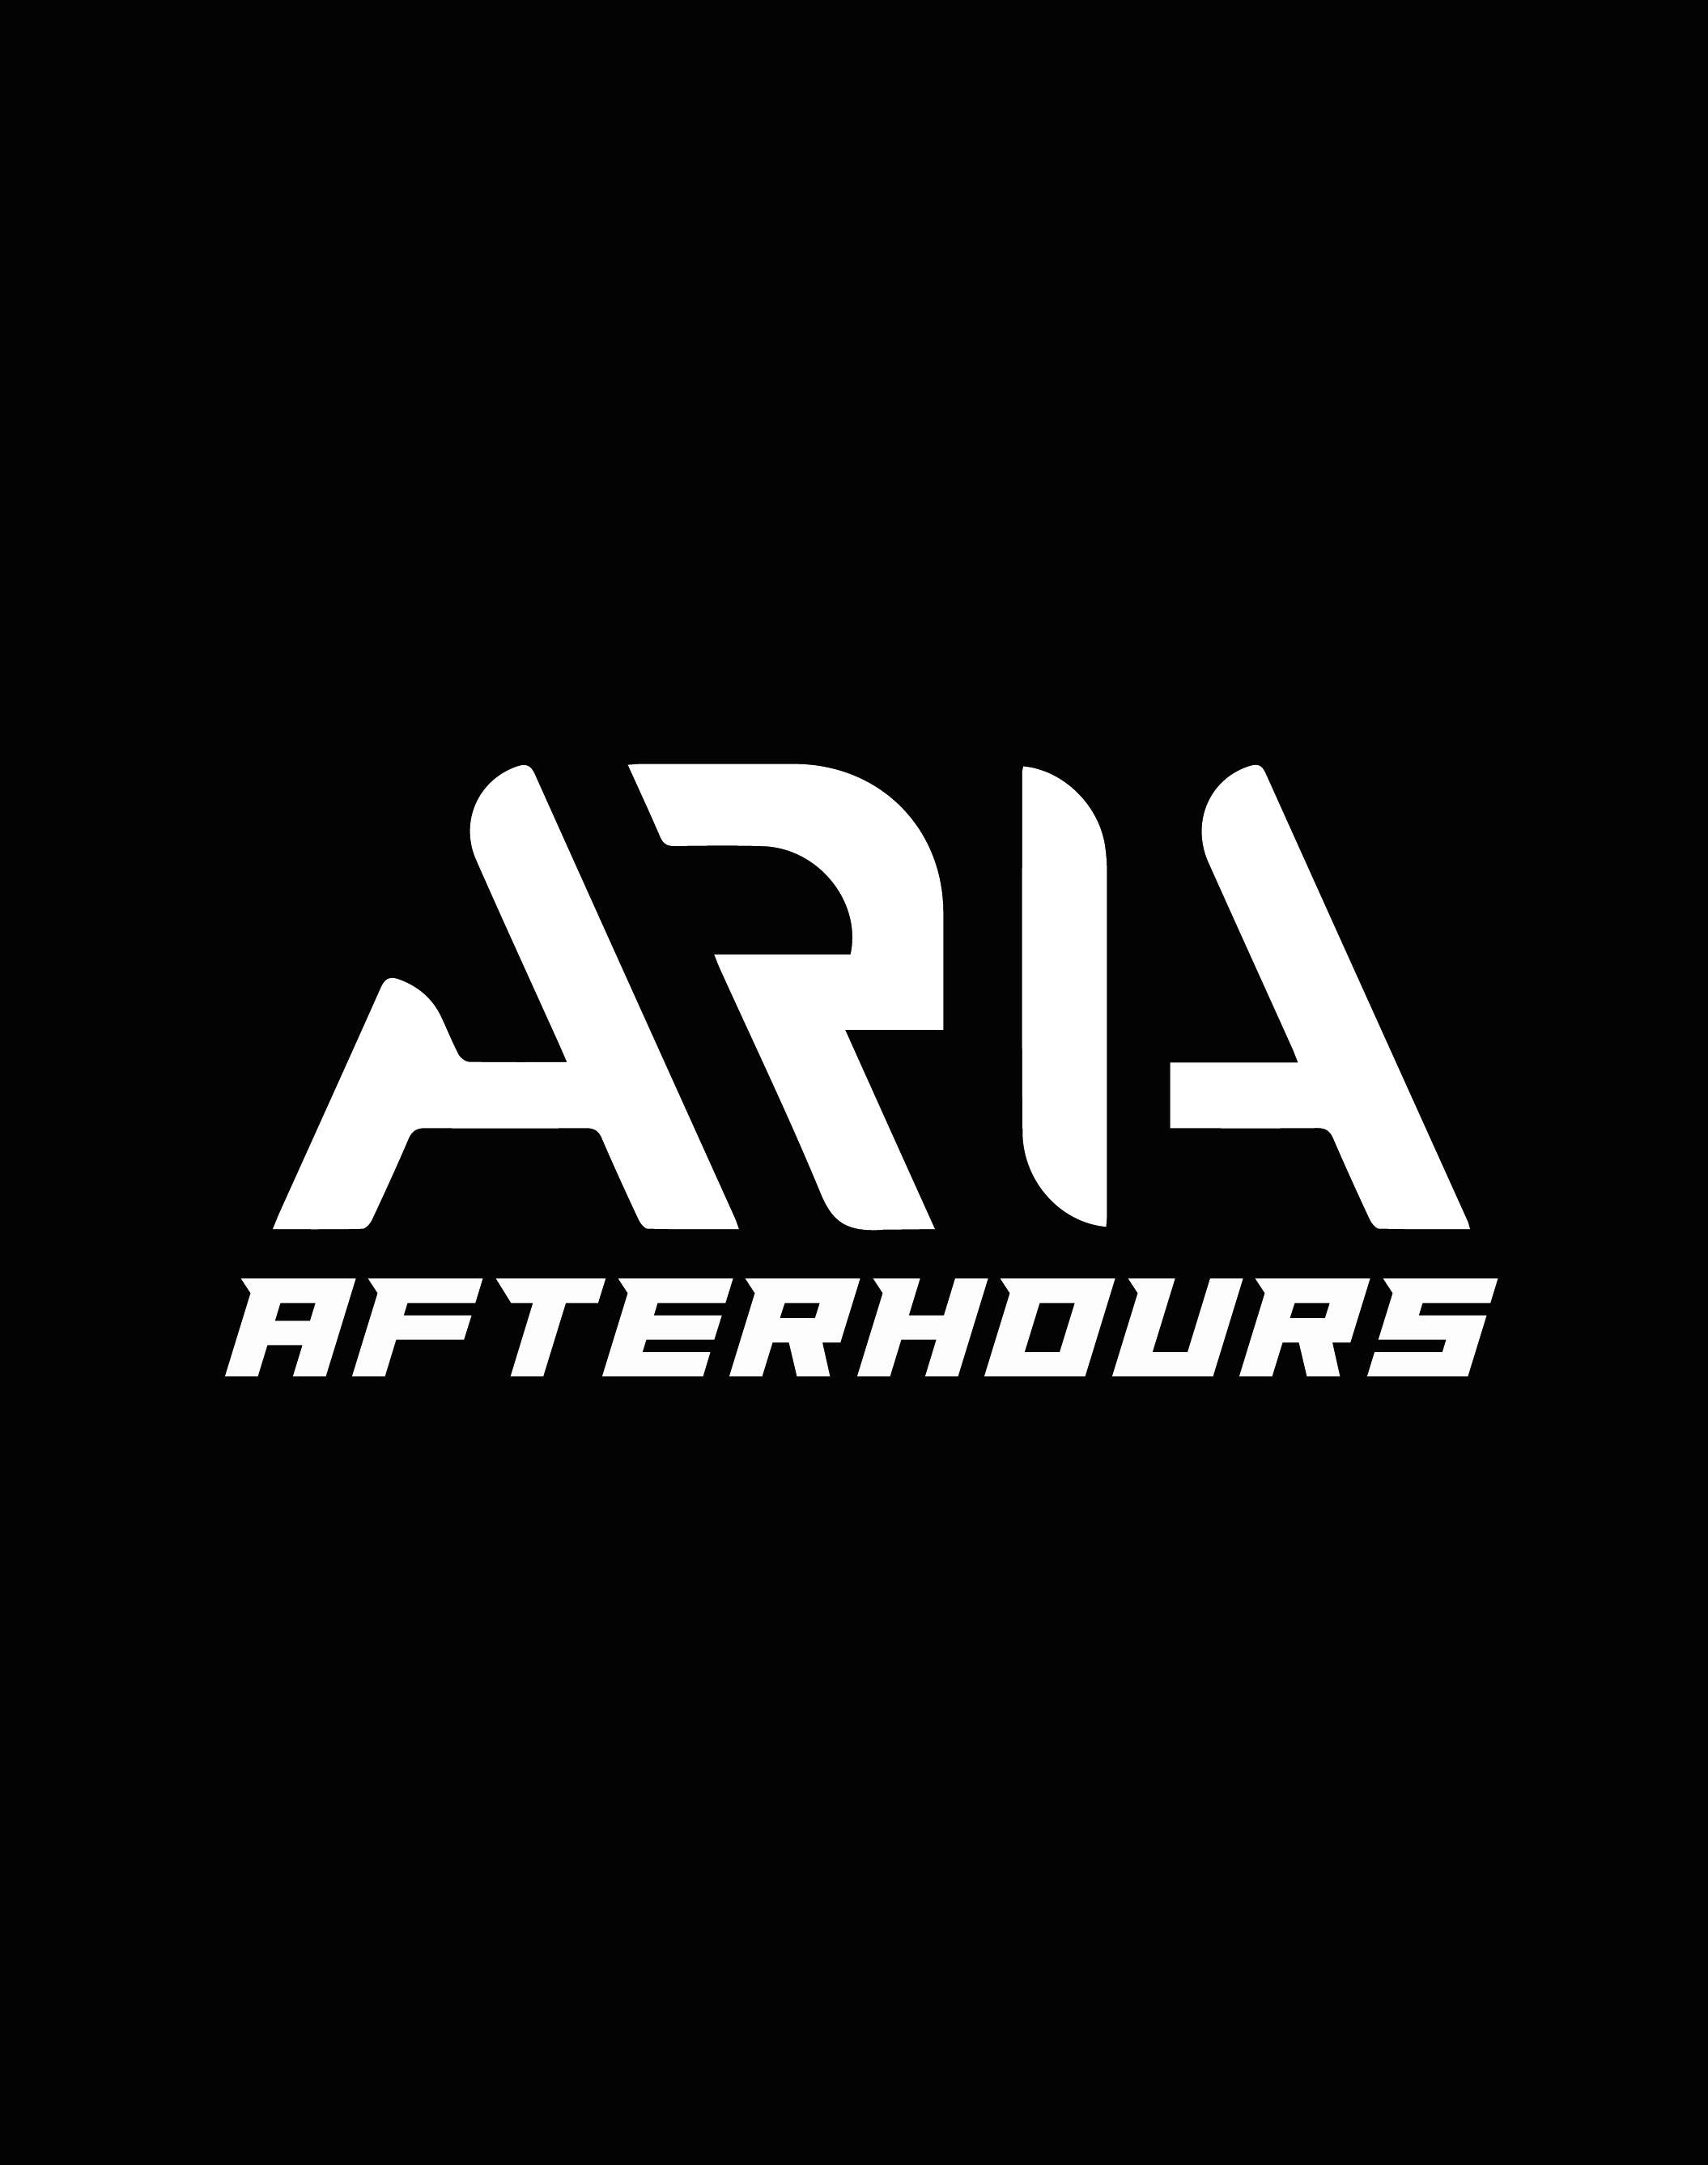 Aria AFTERHOURS - フライヤー表